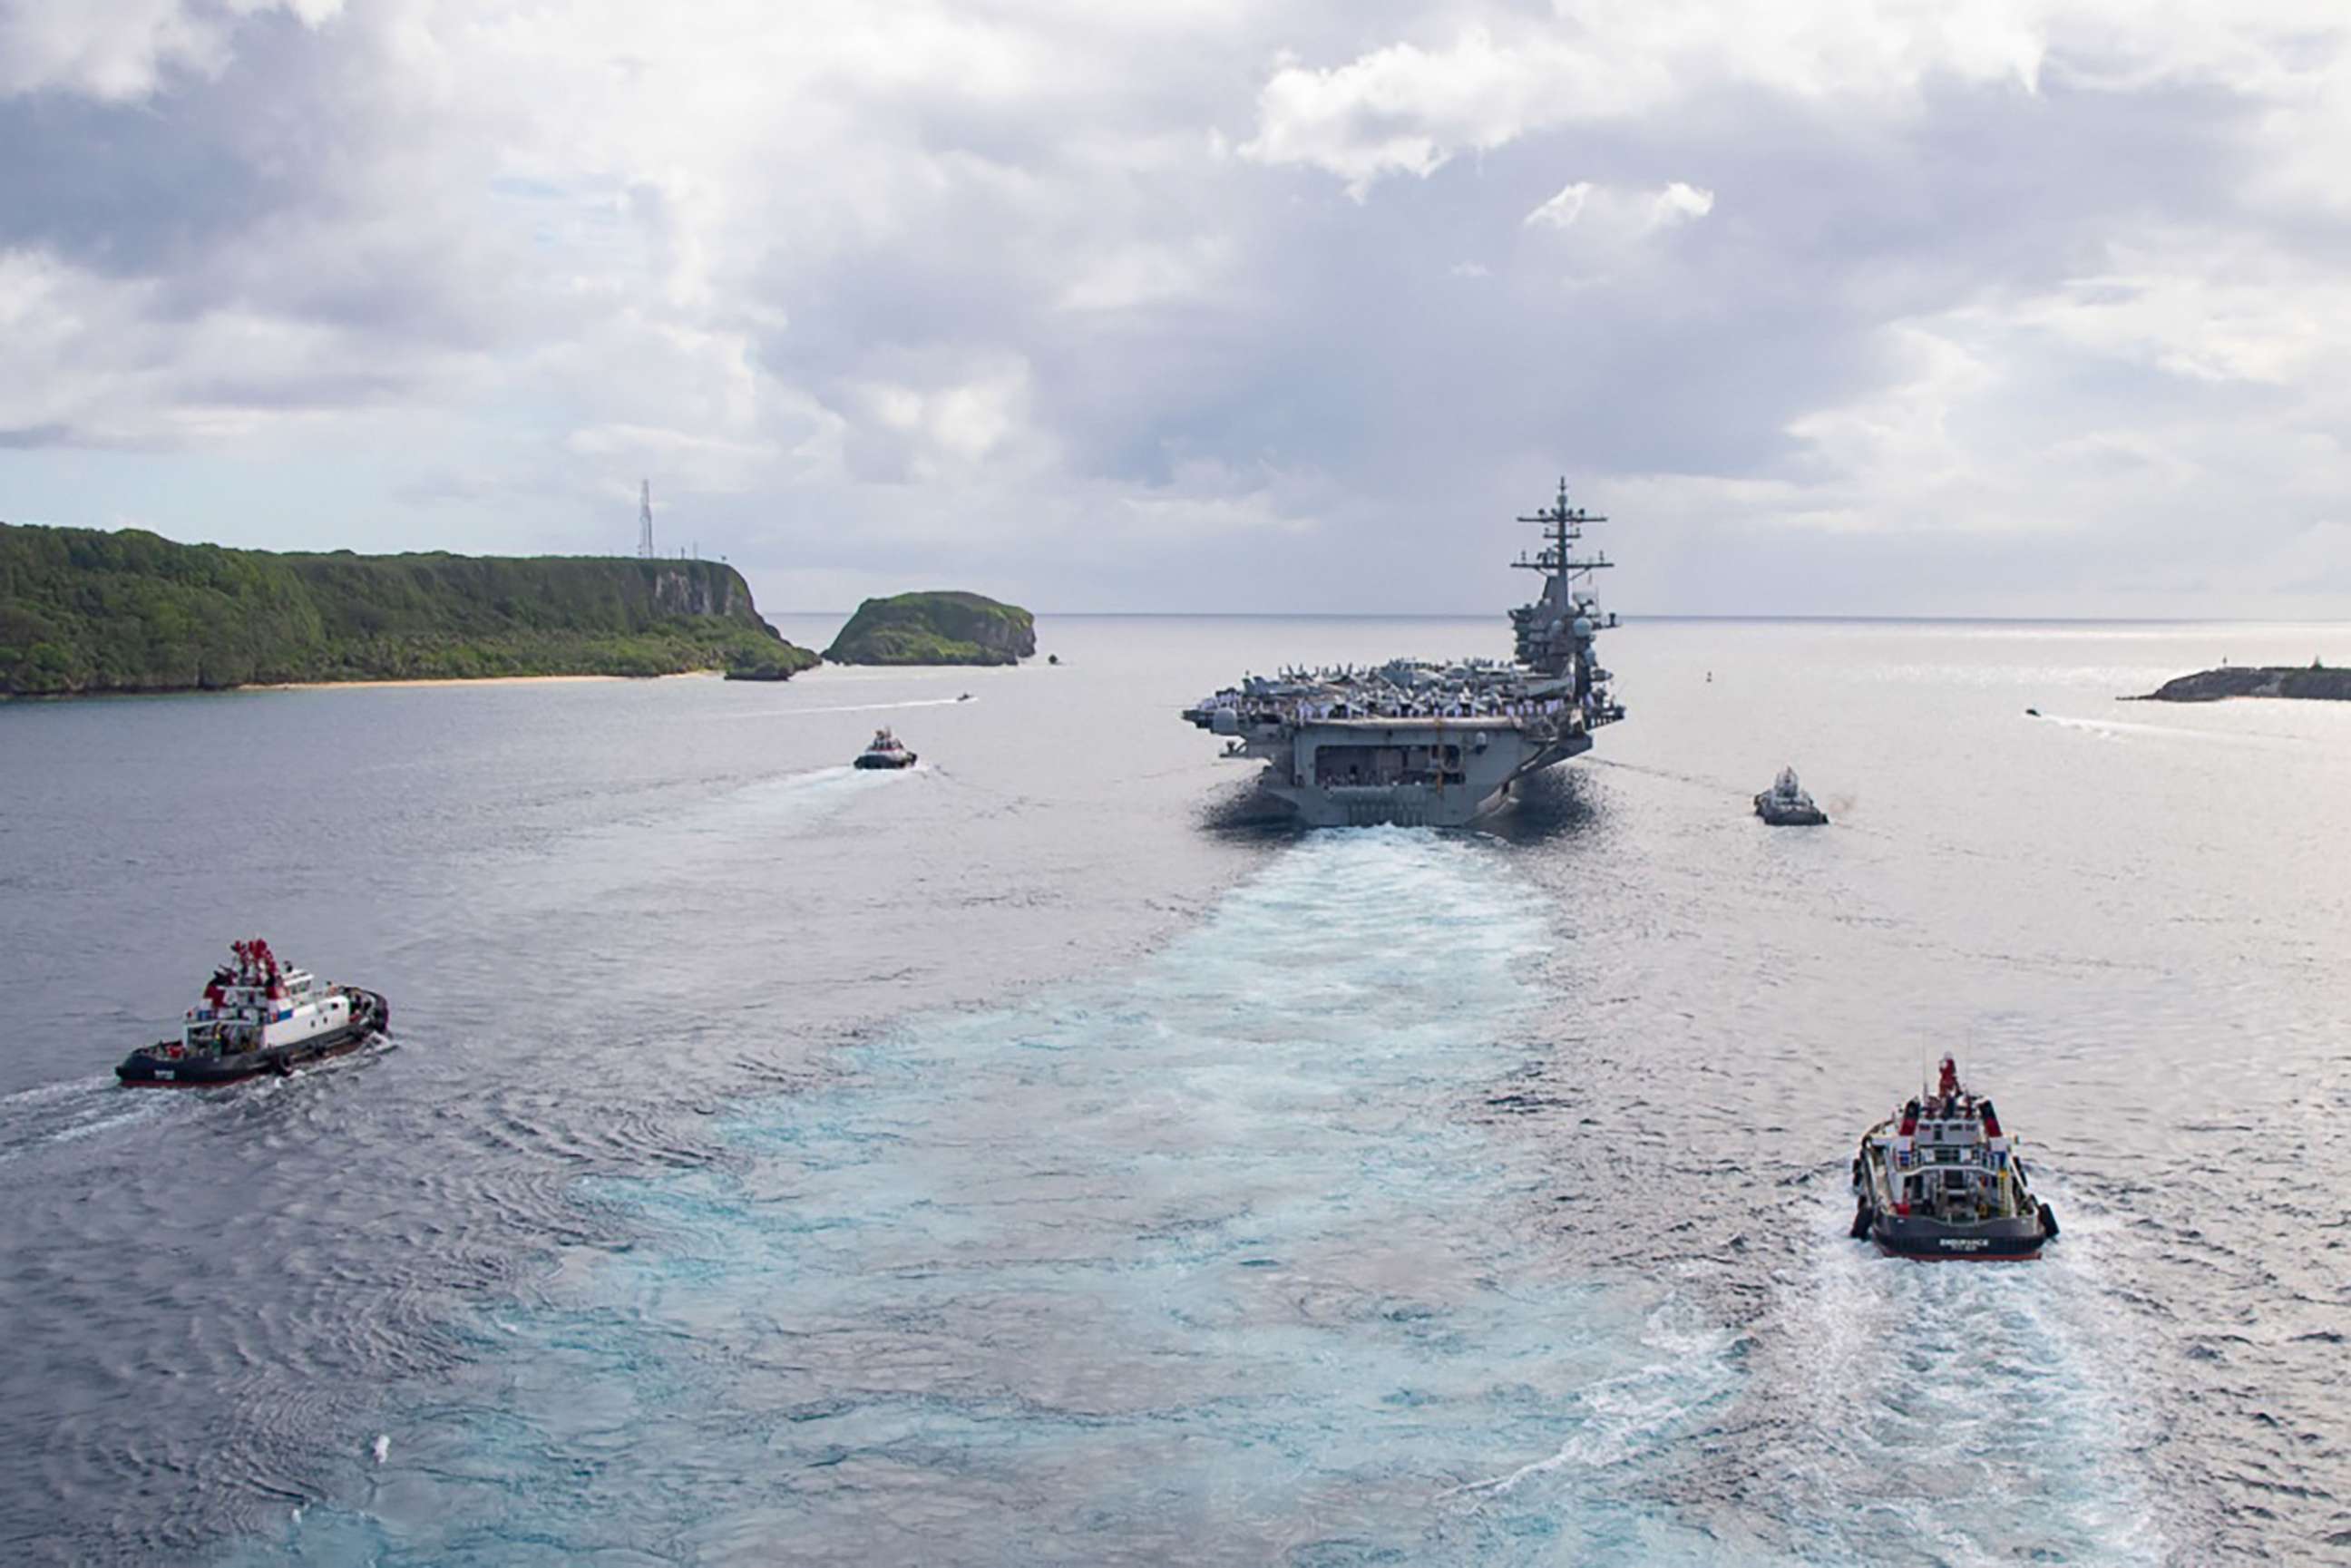 PHOTO: The aircraft carrier USS Theodore Roosevelt (CVN 71) departs Apra Harbor in Guam,  June 4, 2020, following an extended visit in the midst of the COVID-19 global pandemic.